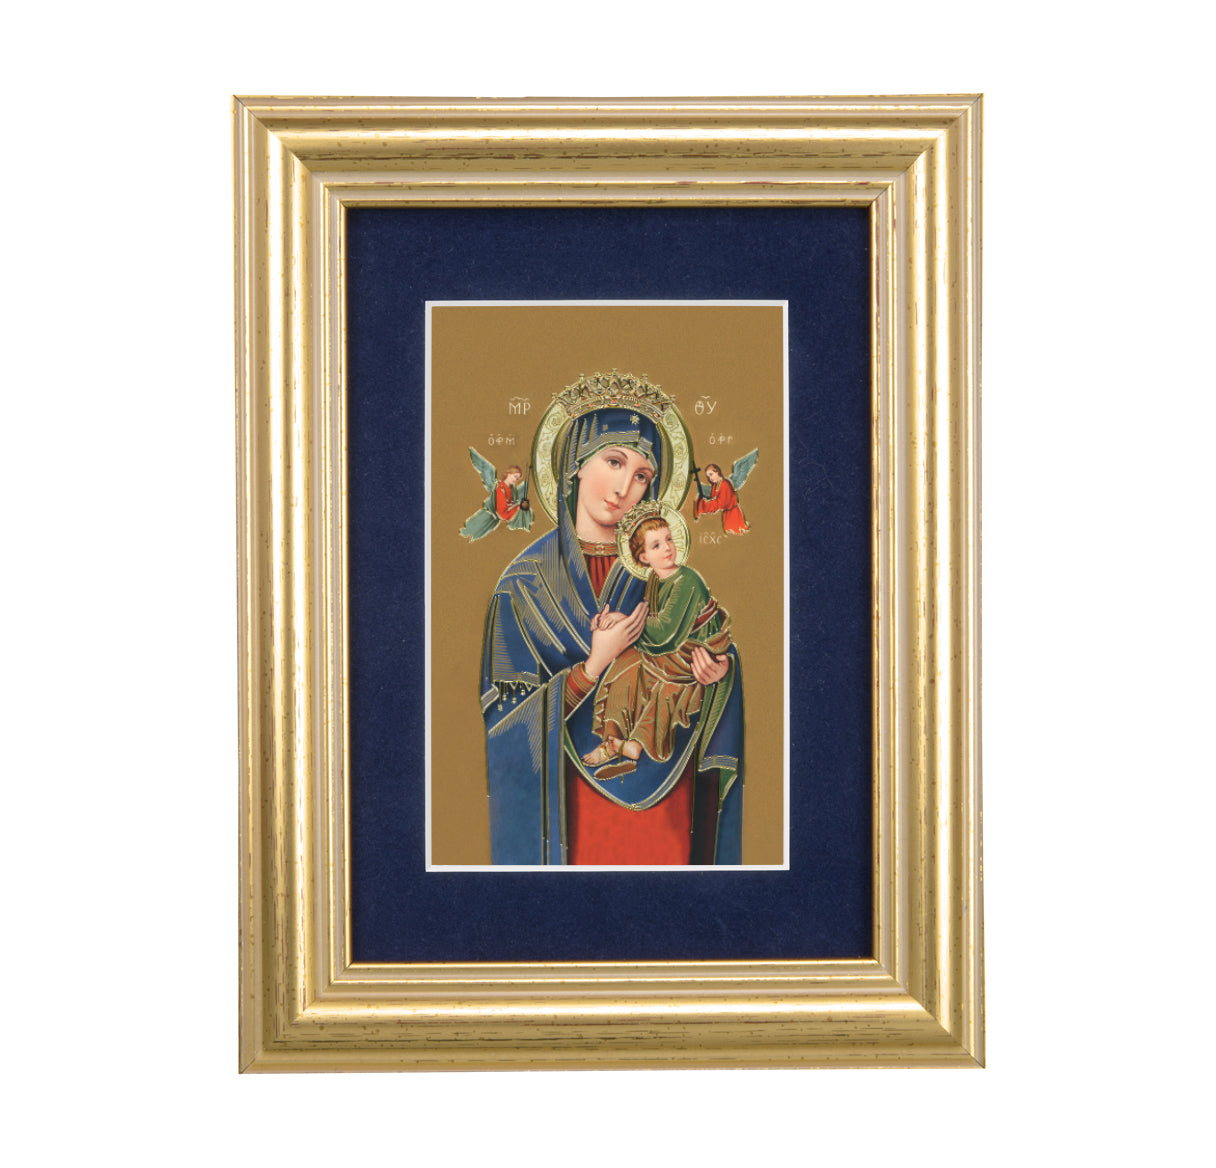 Our Lady of Perpetual Help Gold Framed Art with Blue Velvet Matting